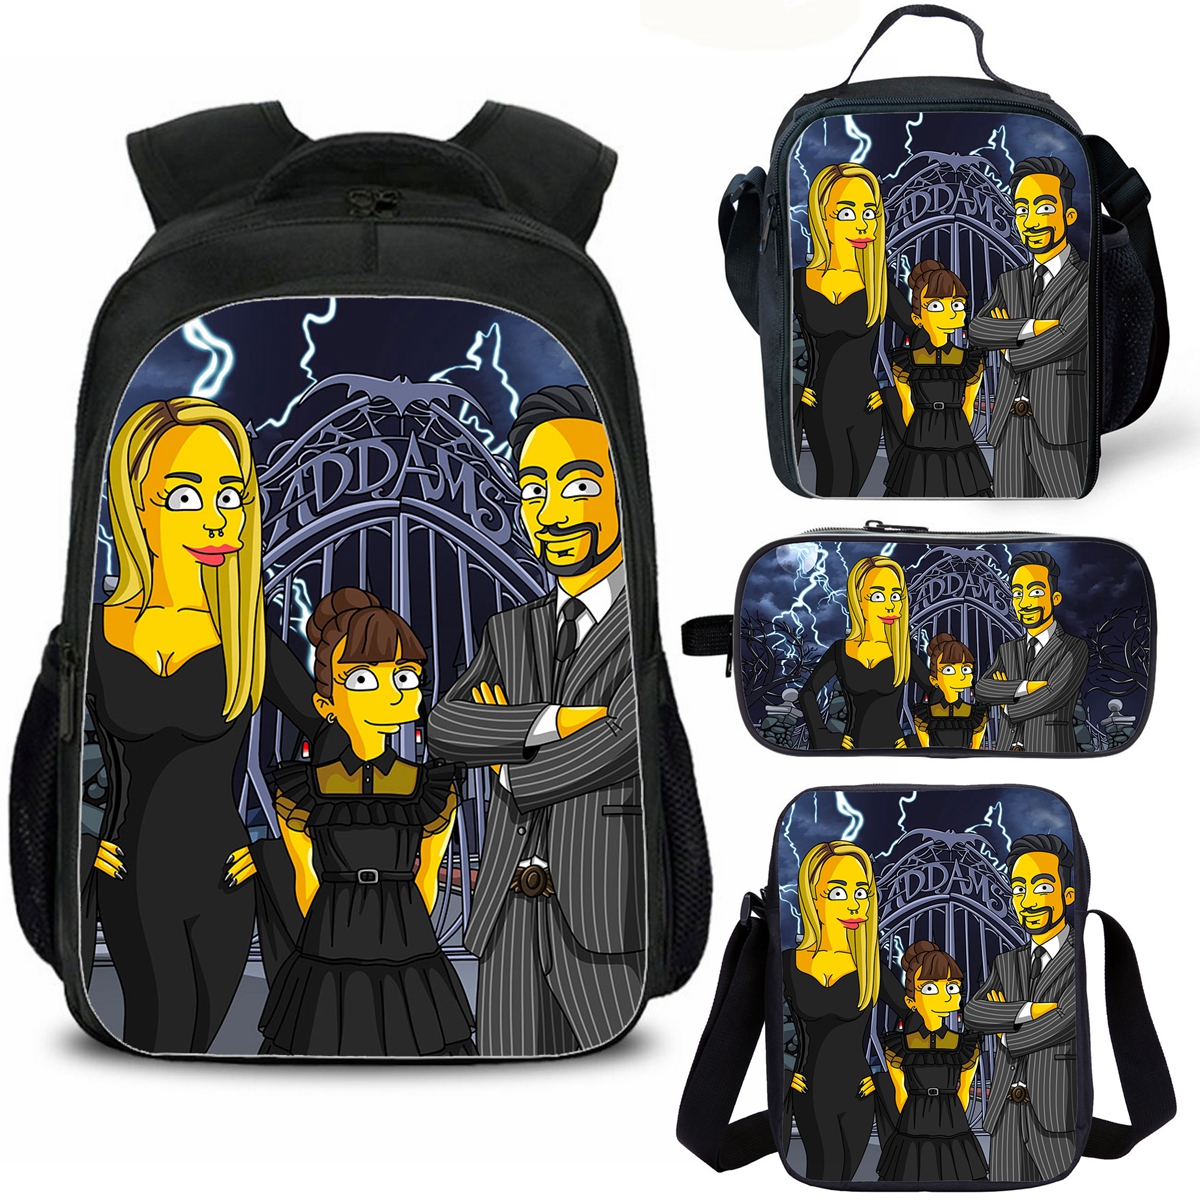 Simpsons Style Addans Family Wednesday Kids School Backpack Insulated Lunch Bag Shoulder Bag Pencil Case 